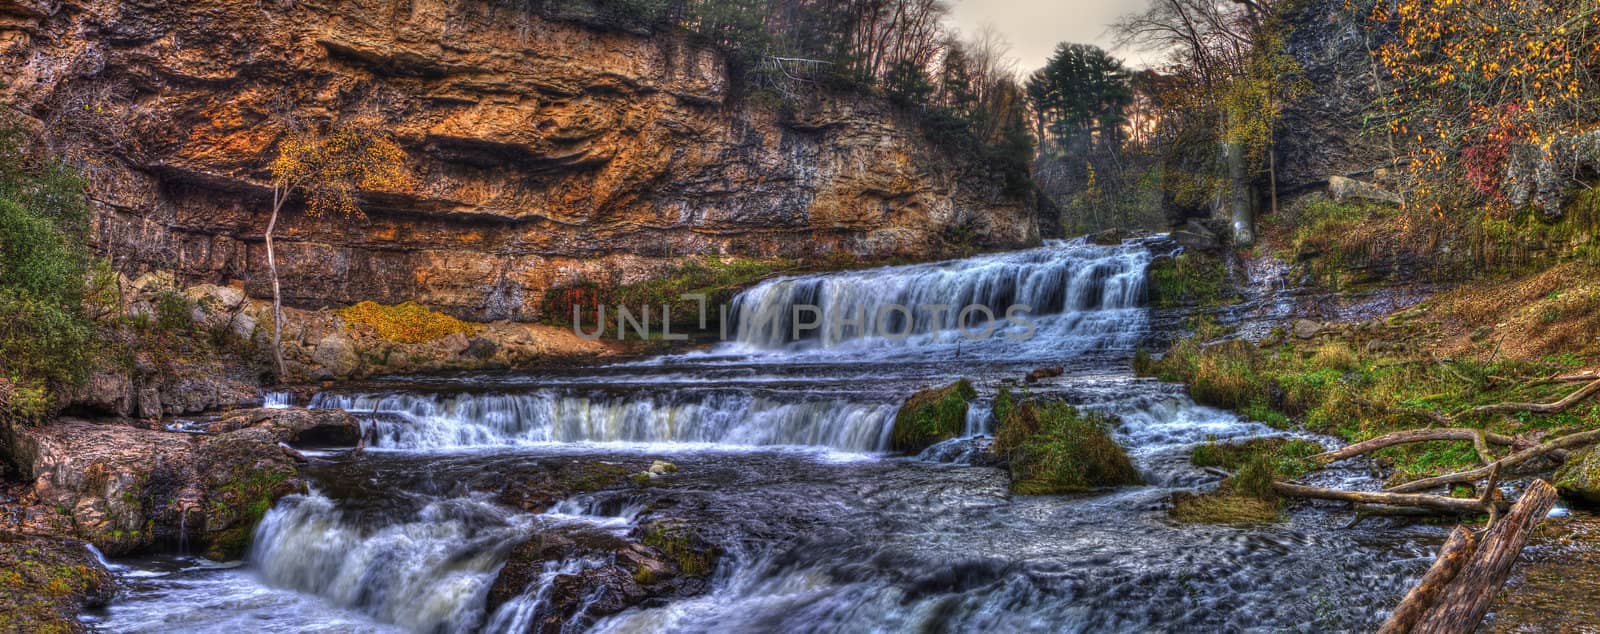 Colorful Waterfall flowing through a valley in hdr.